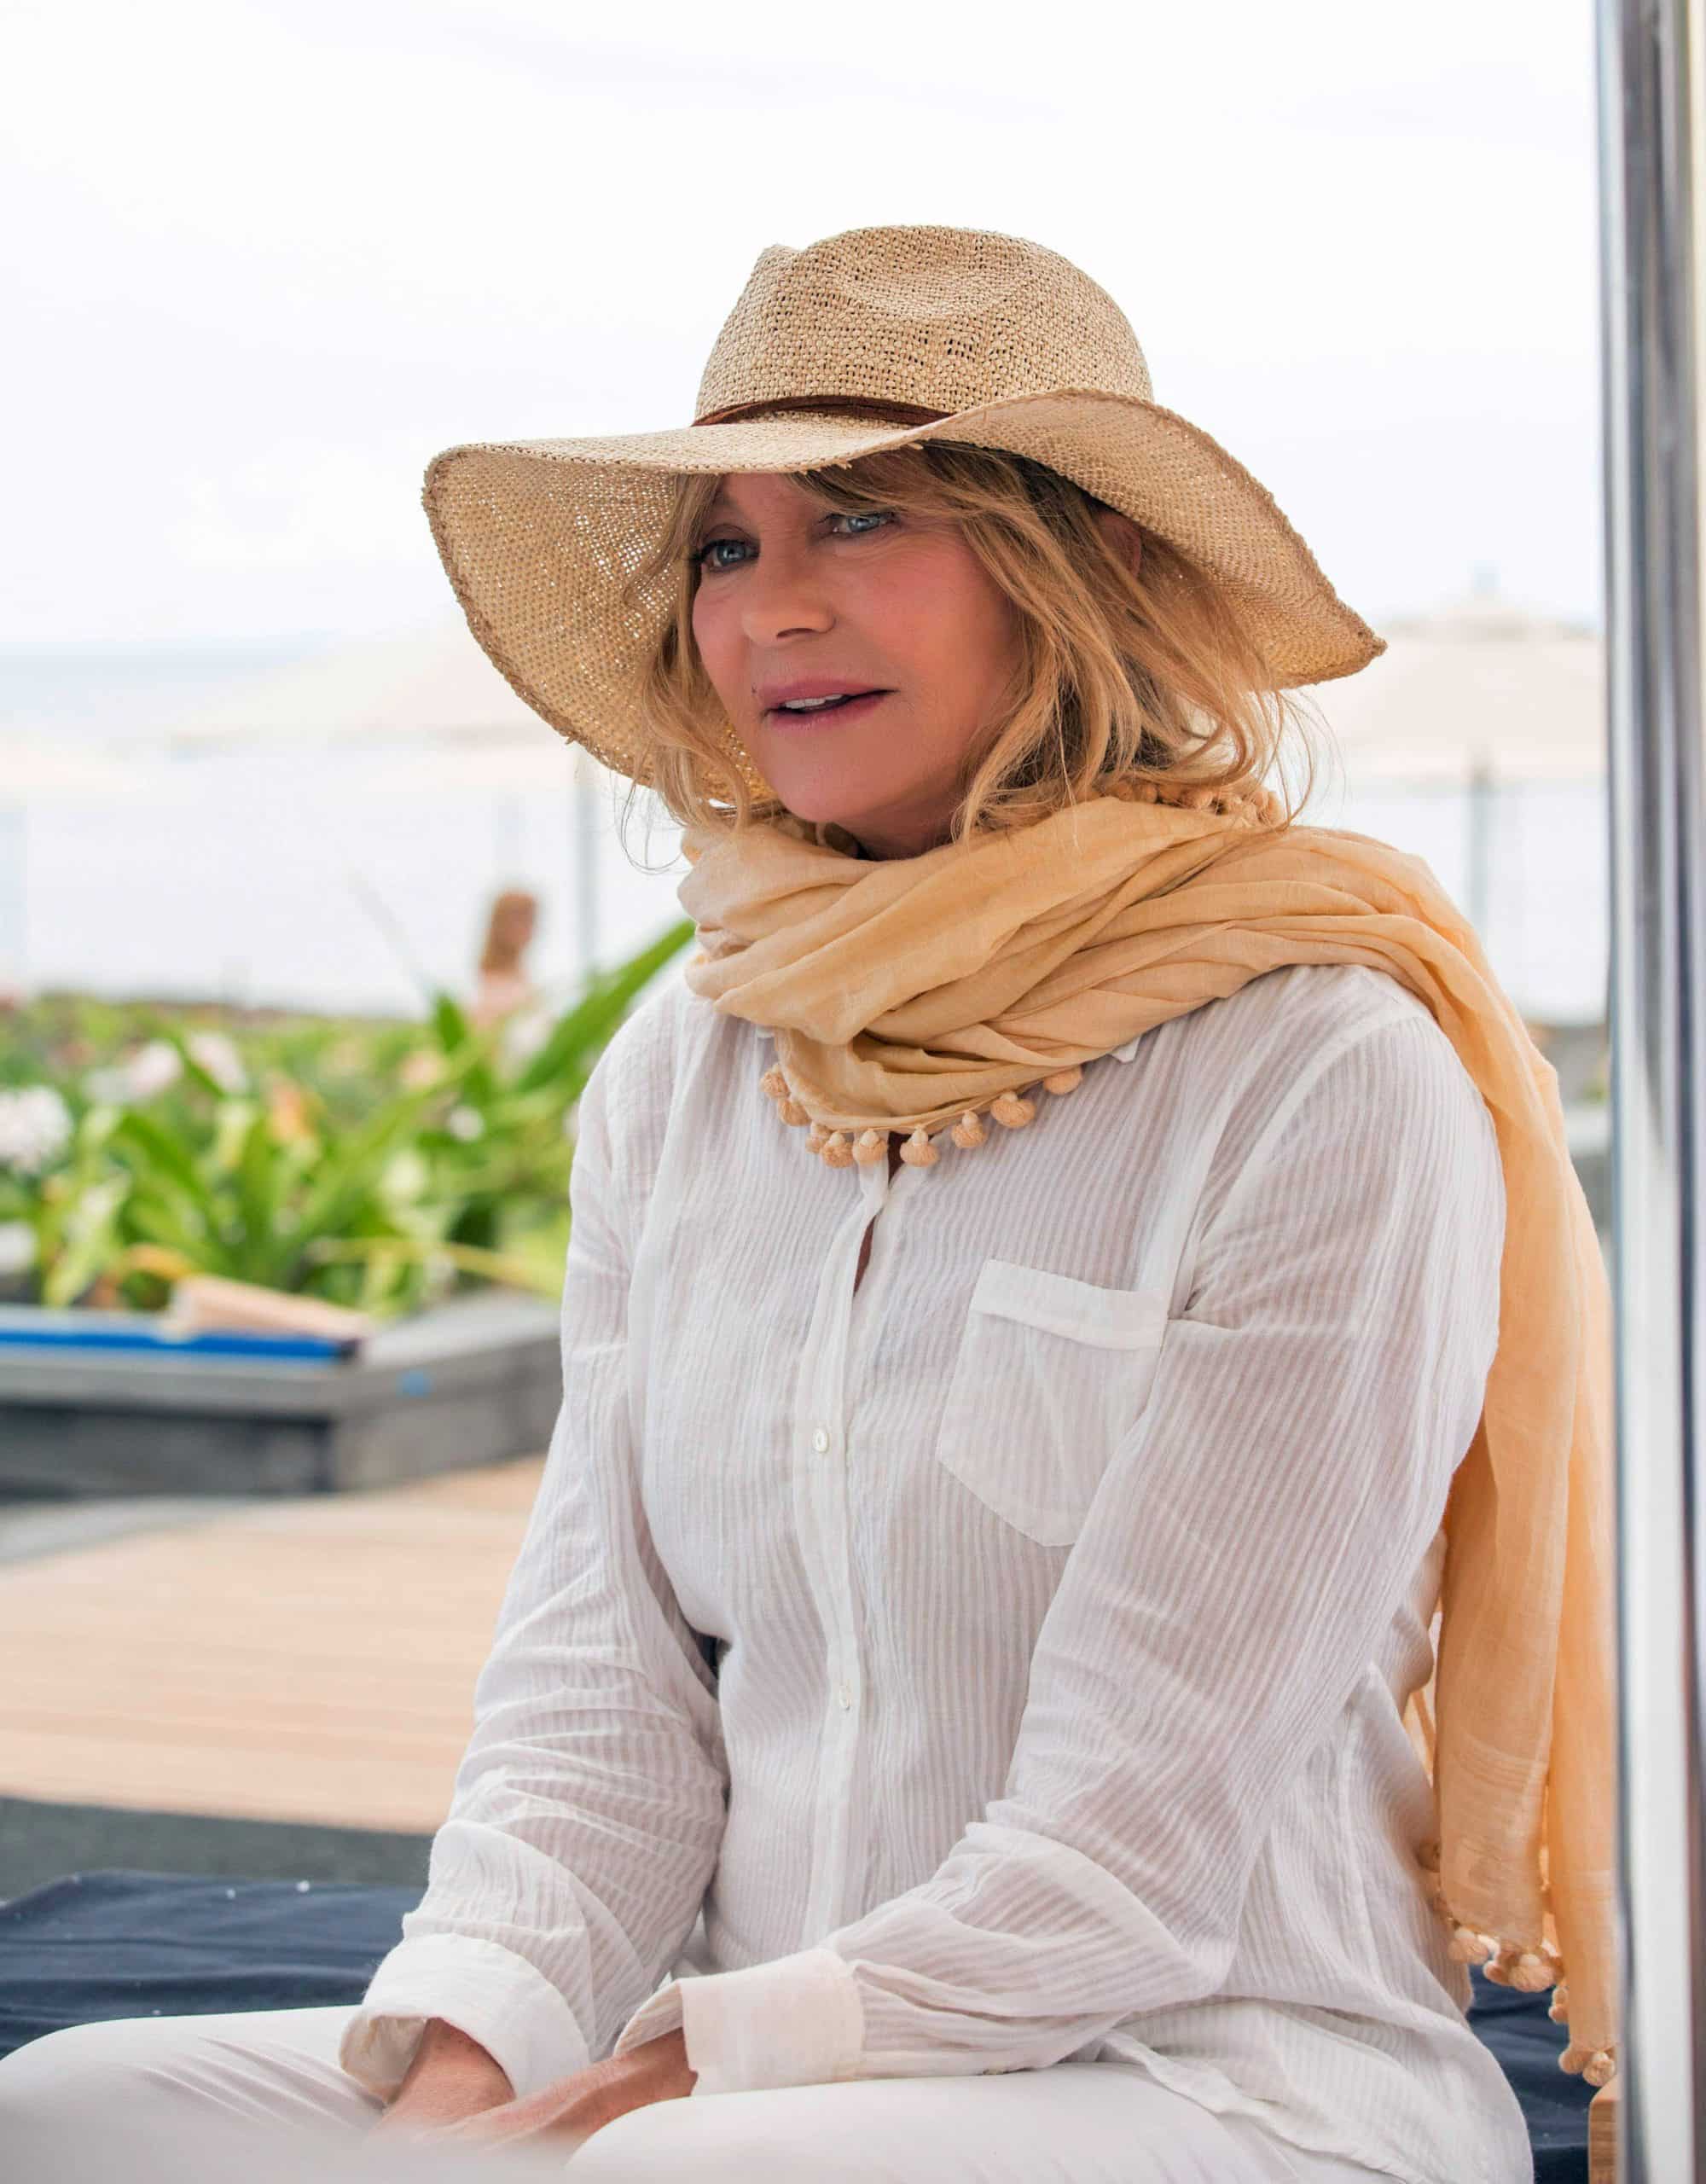 Goldie Hawn returns to the big screen as Linda Middleton in Twentieth Century Fox’s SNATCHED 